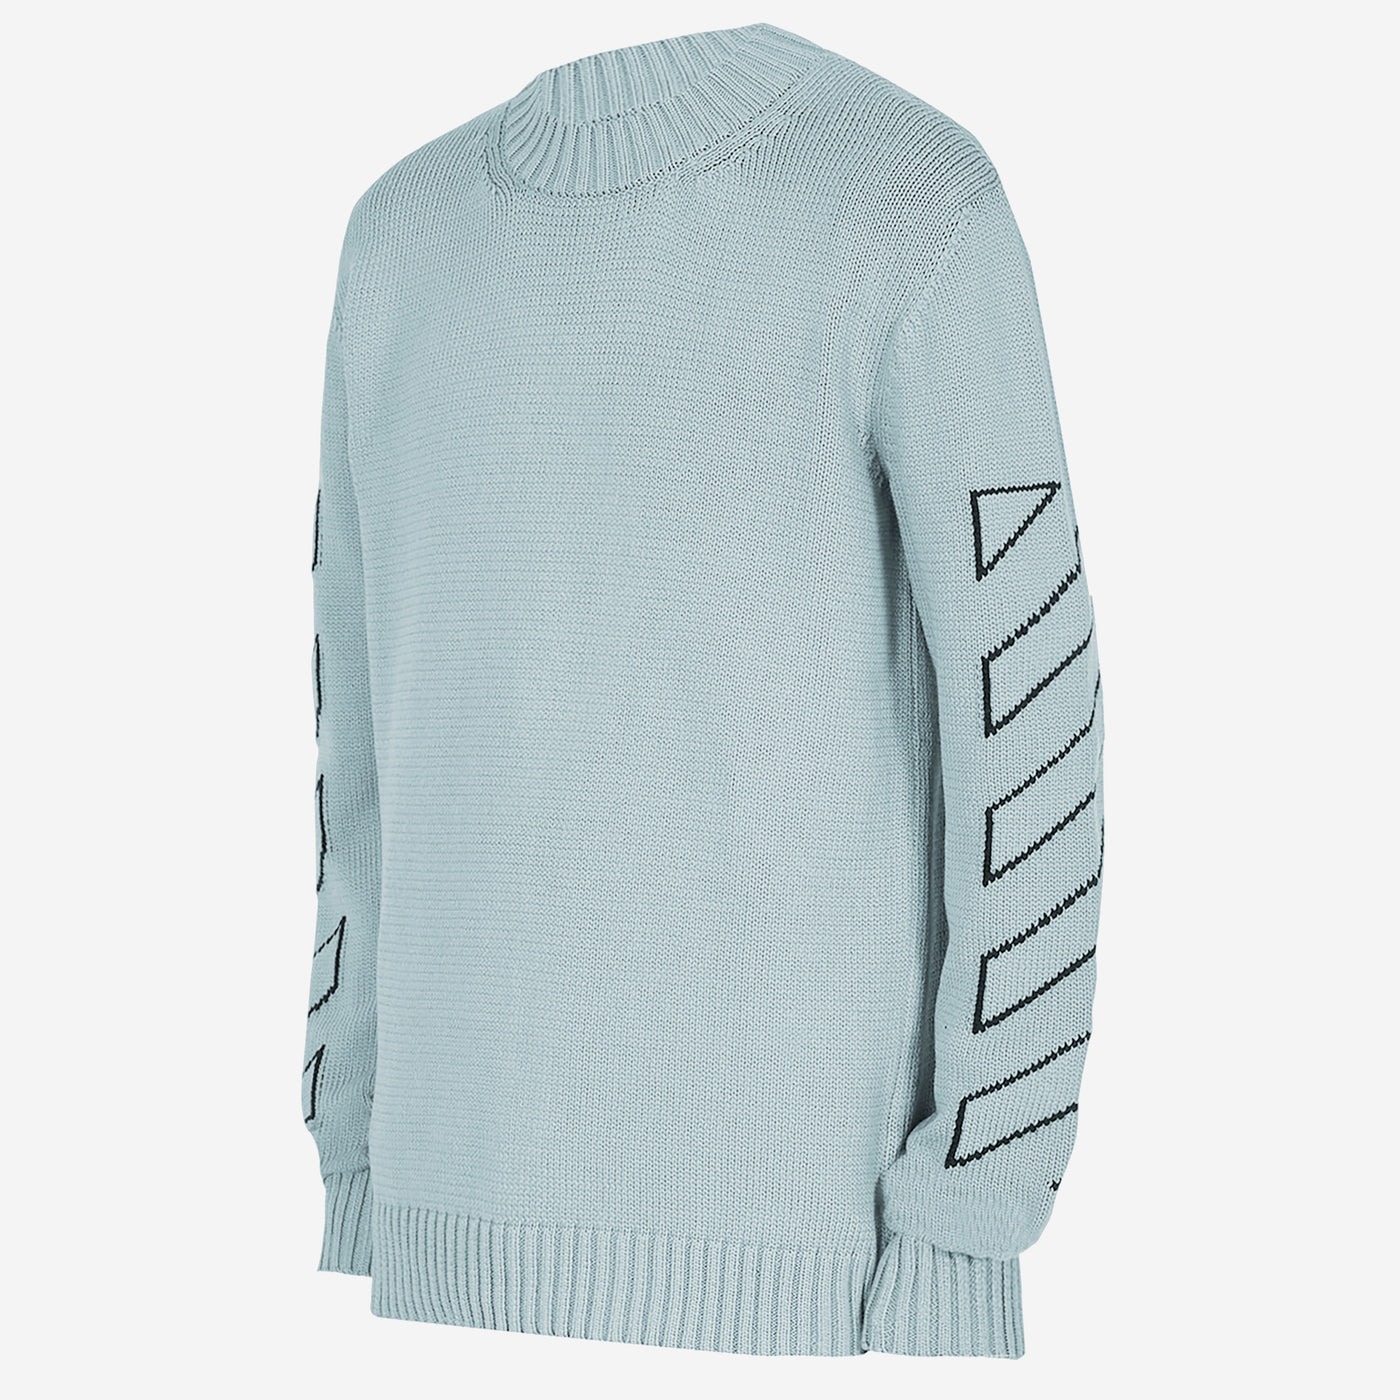 Off-White Diag Outline Knitwear